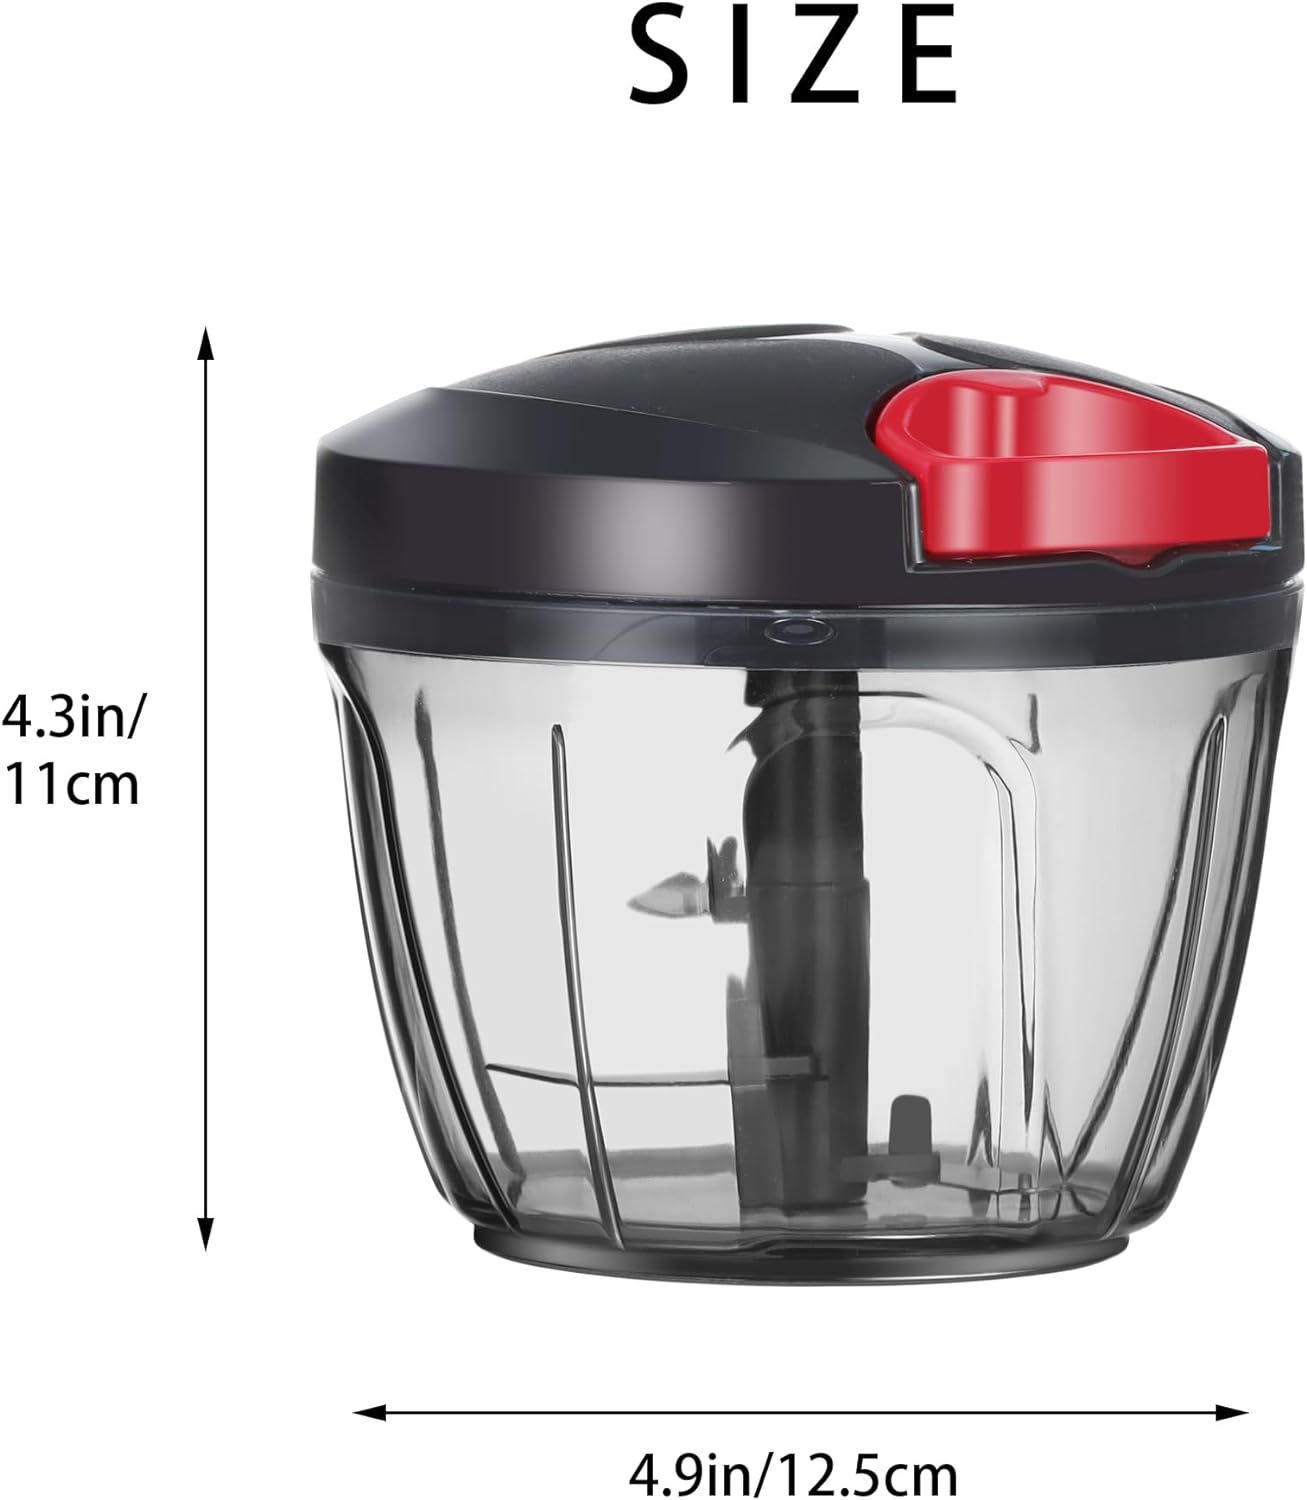 Ourokhome Portable Pull Onion Chopper - Manual Food Processor Garlic Crusher to Chop Fruits, Onion, Carrot, Nuts, Herbs, Meat for Pesto, Coleslaw, Salsa (Red)